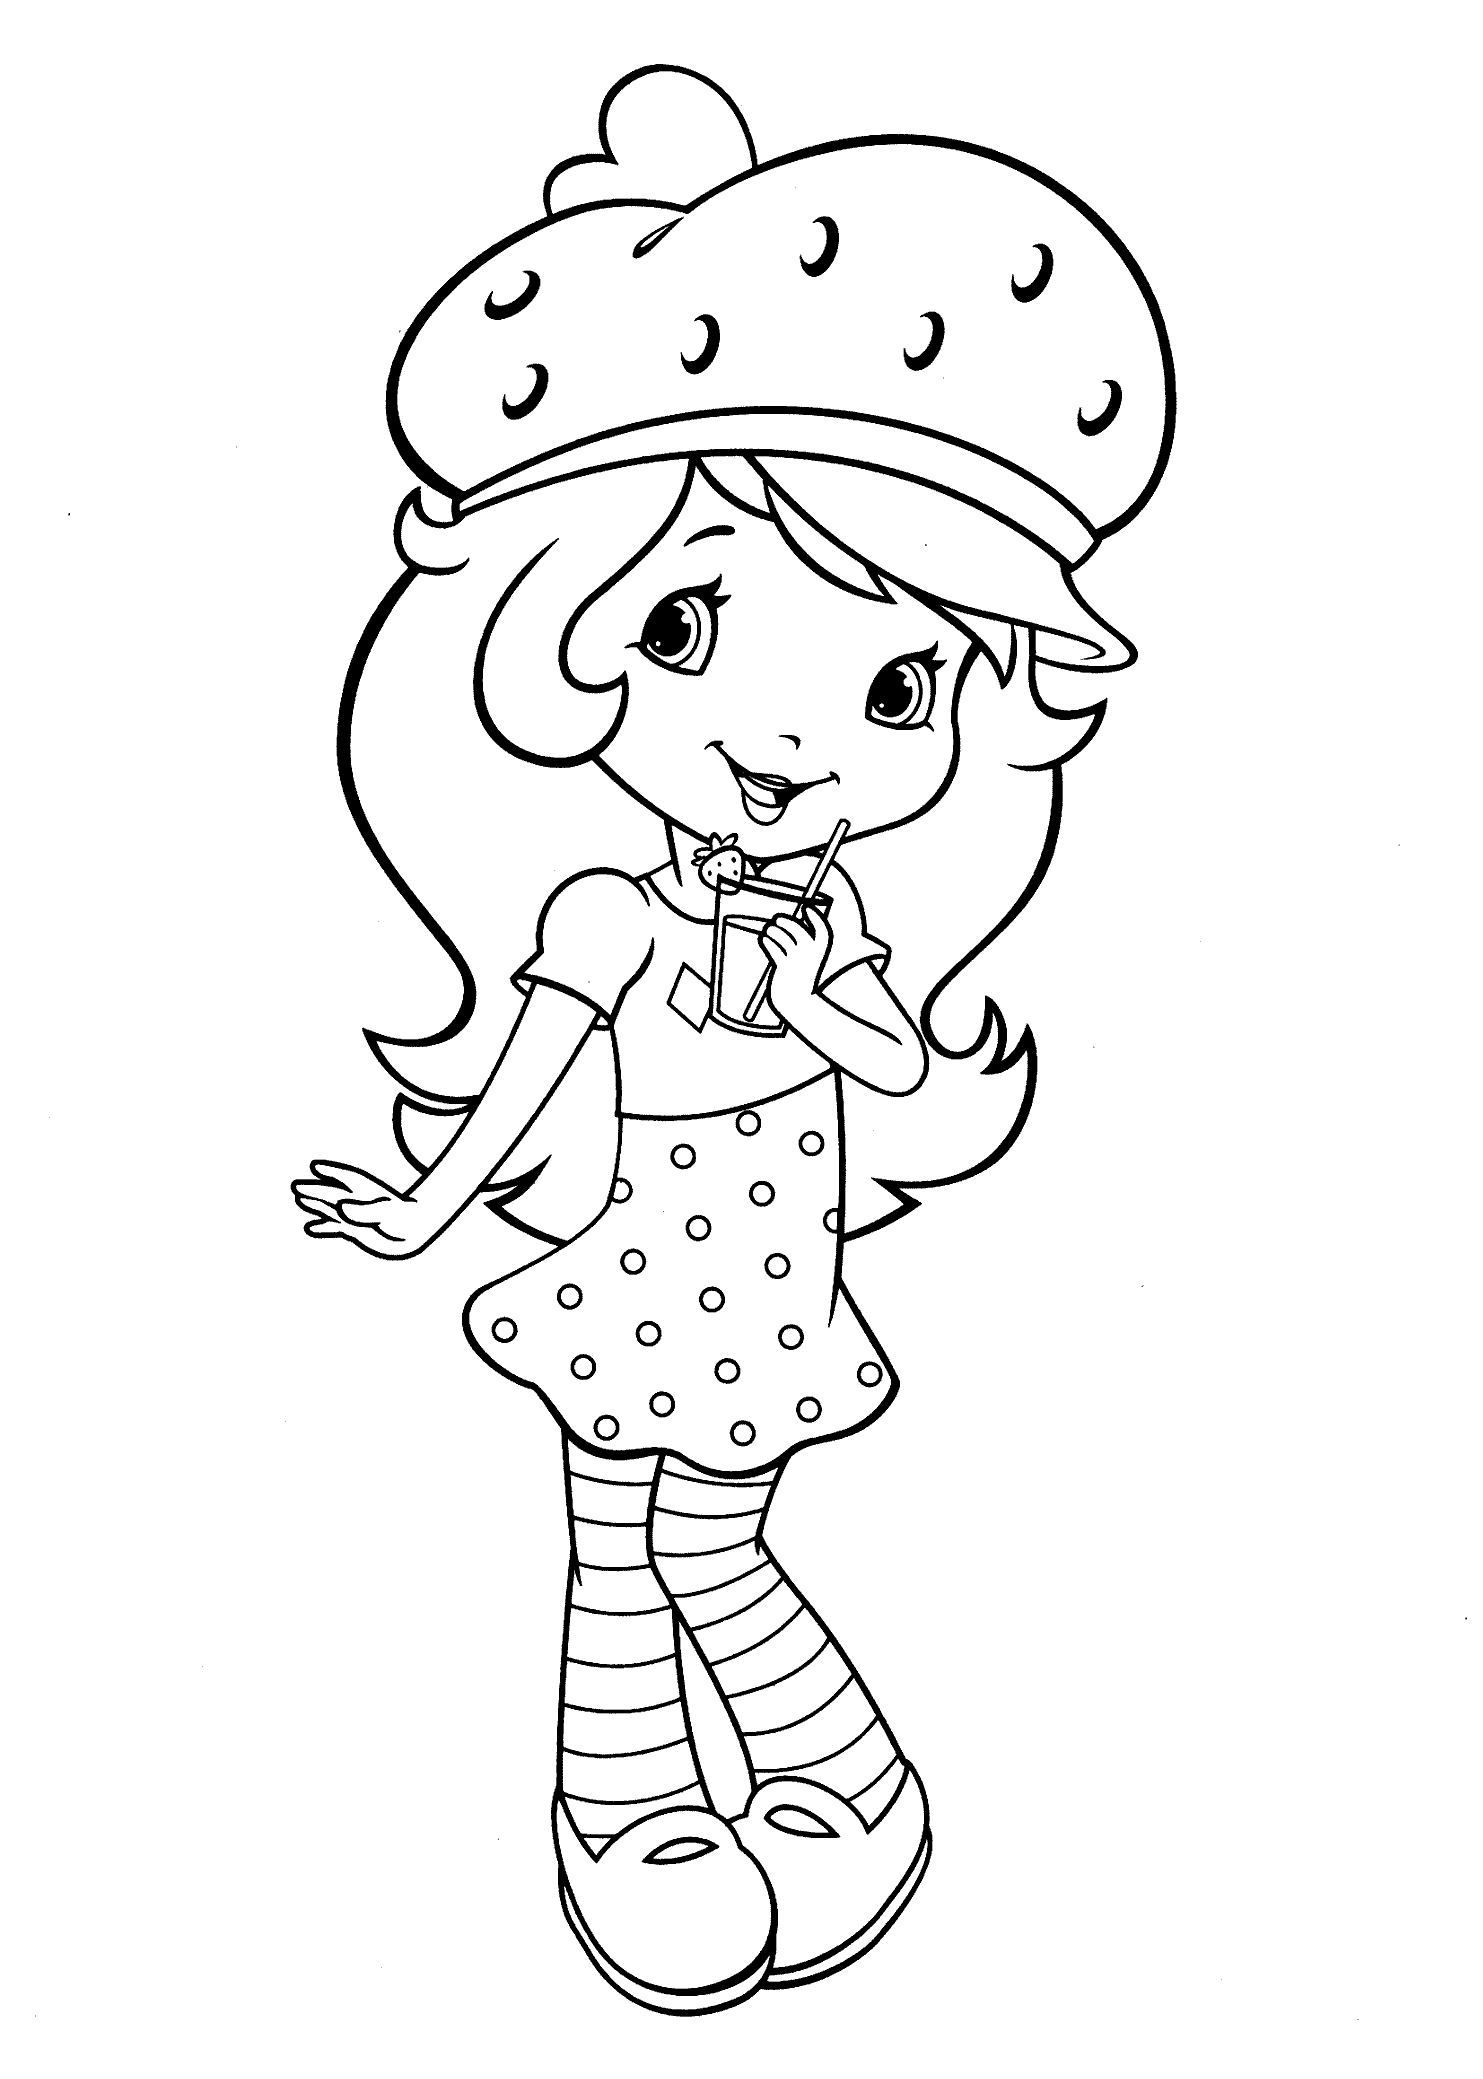 pictures of strawberry shortcake strawberry shortcake coloring pages for kids printable shortcake strawberry of pictures 